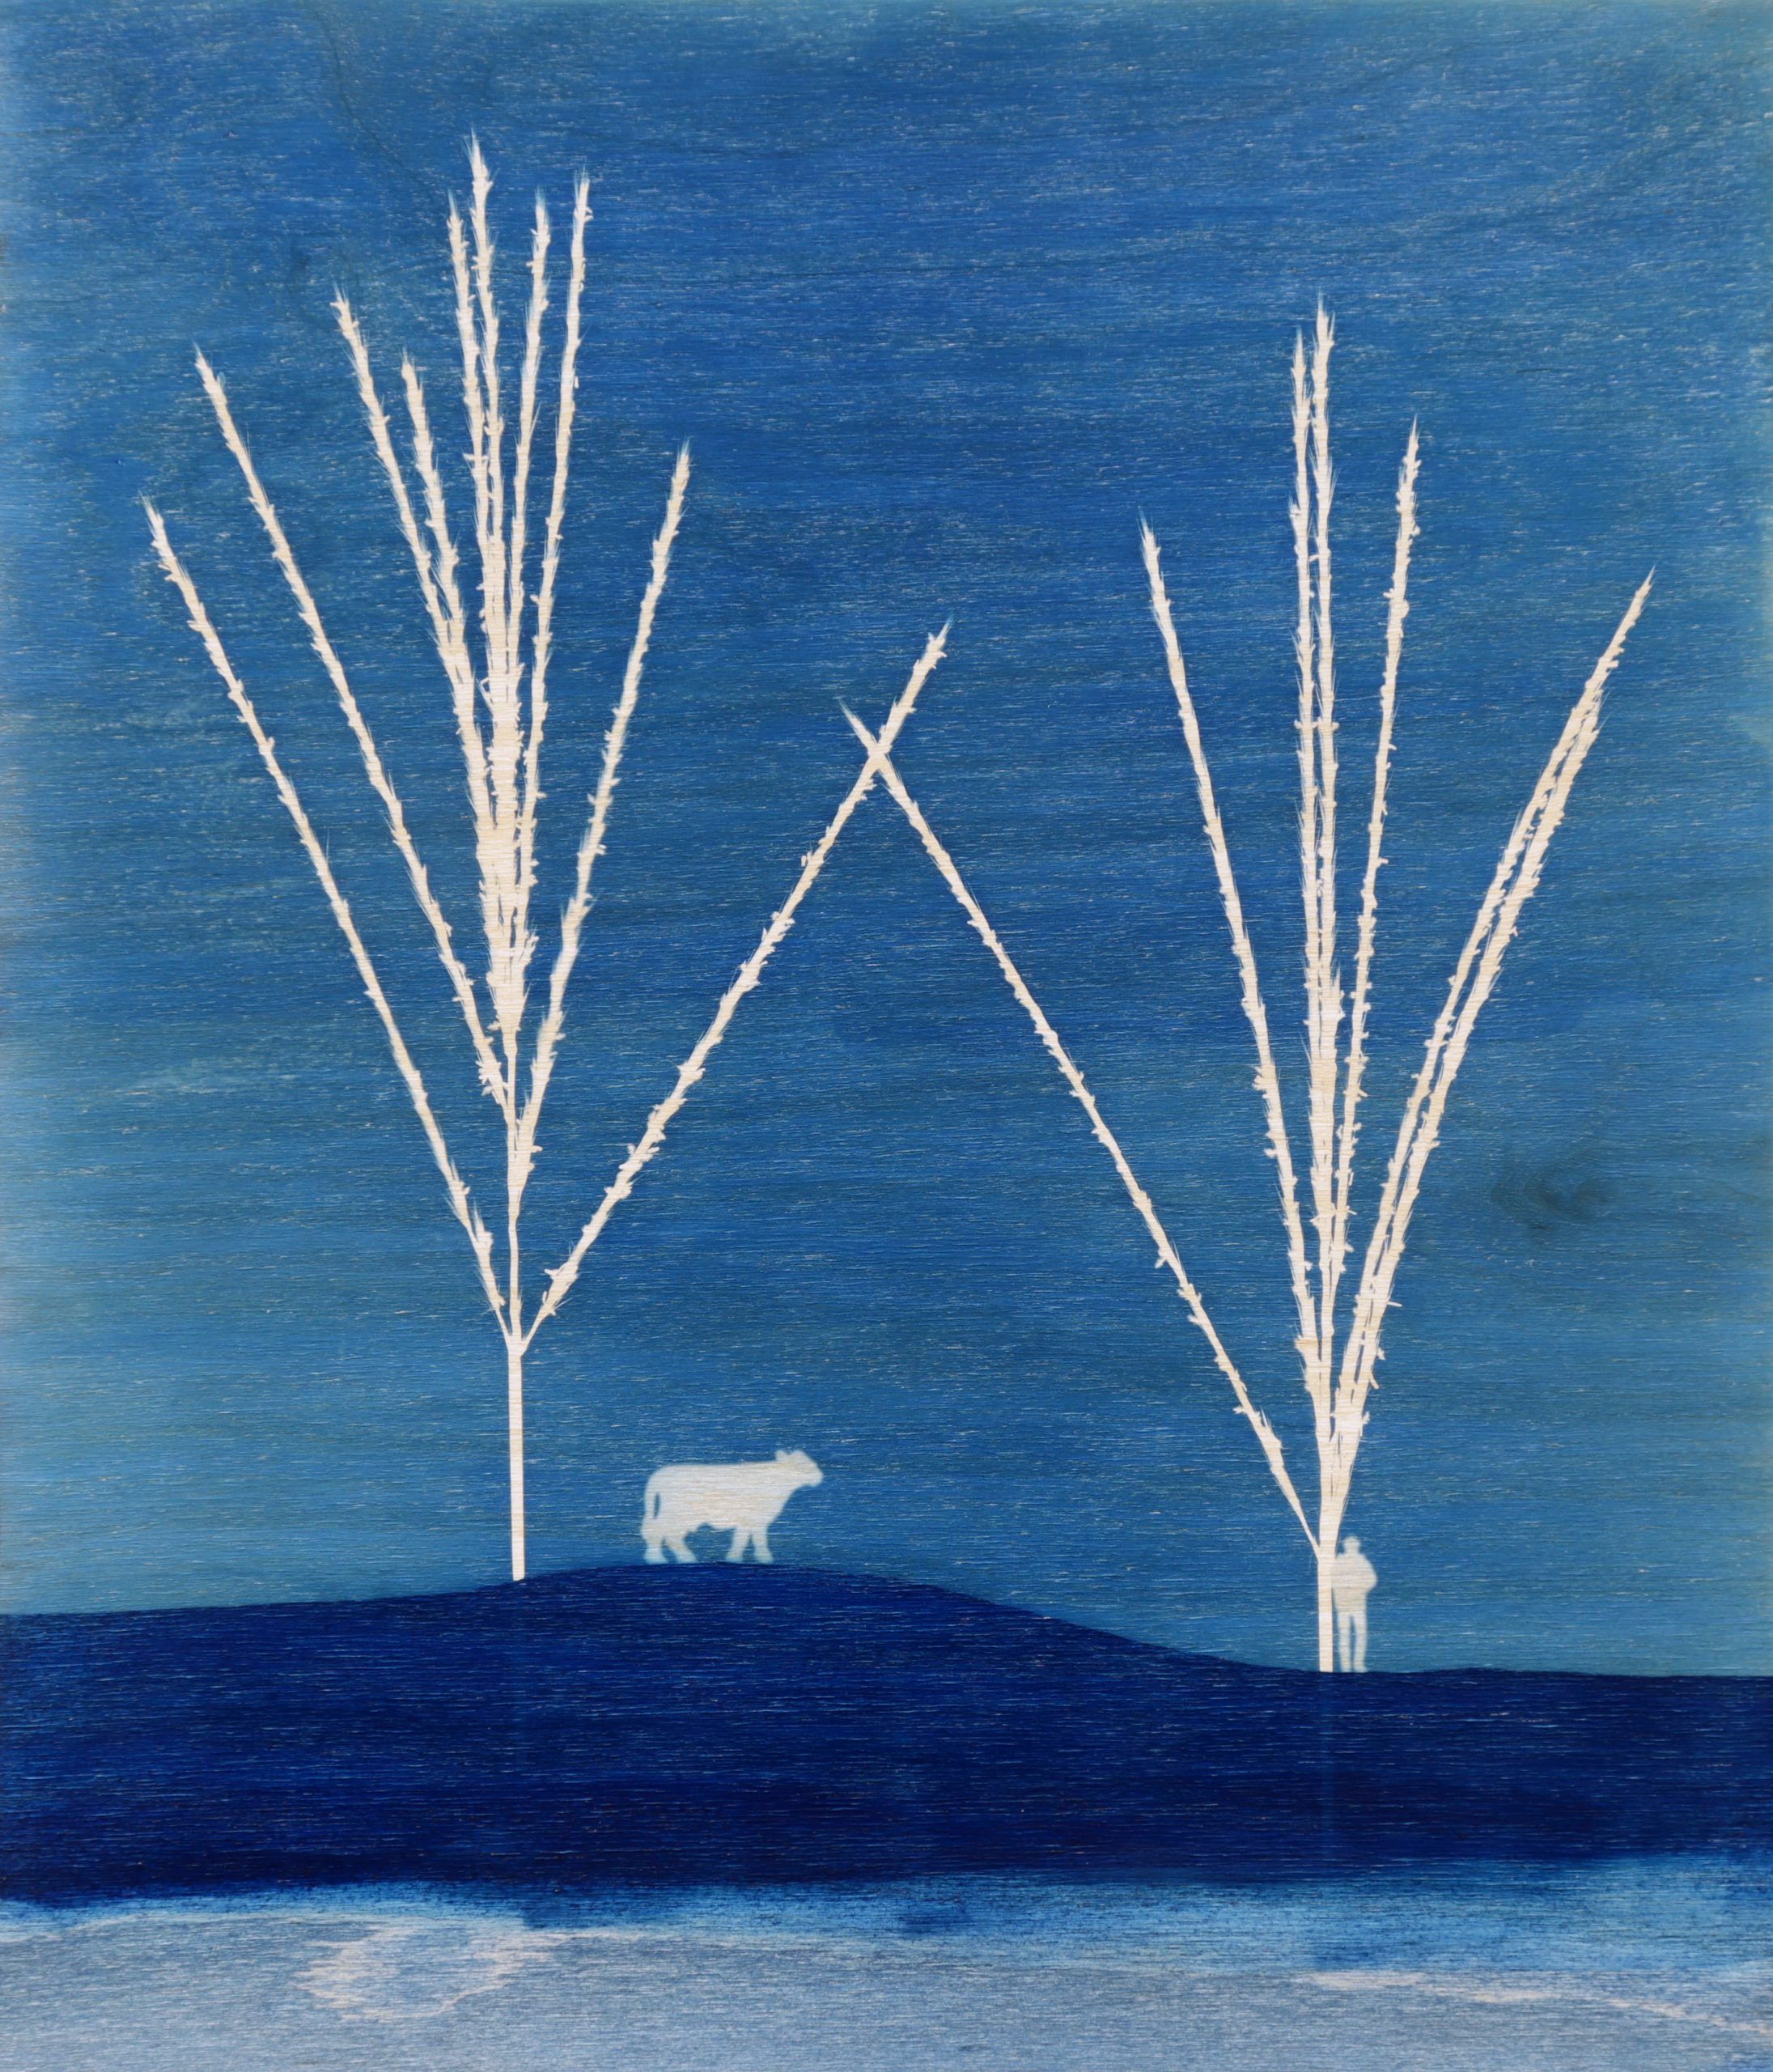     Peter Friedrichsen, Who is There?, cyanotype on birch ply, 2019

